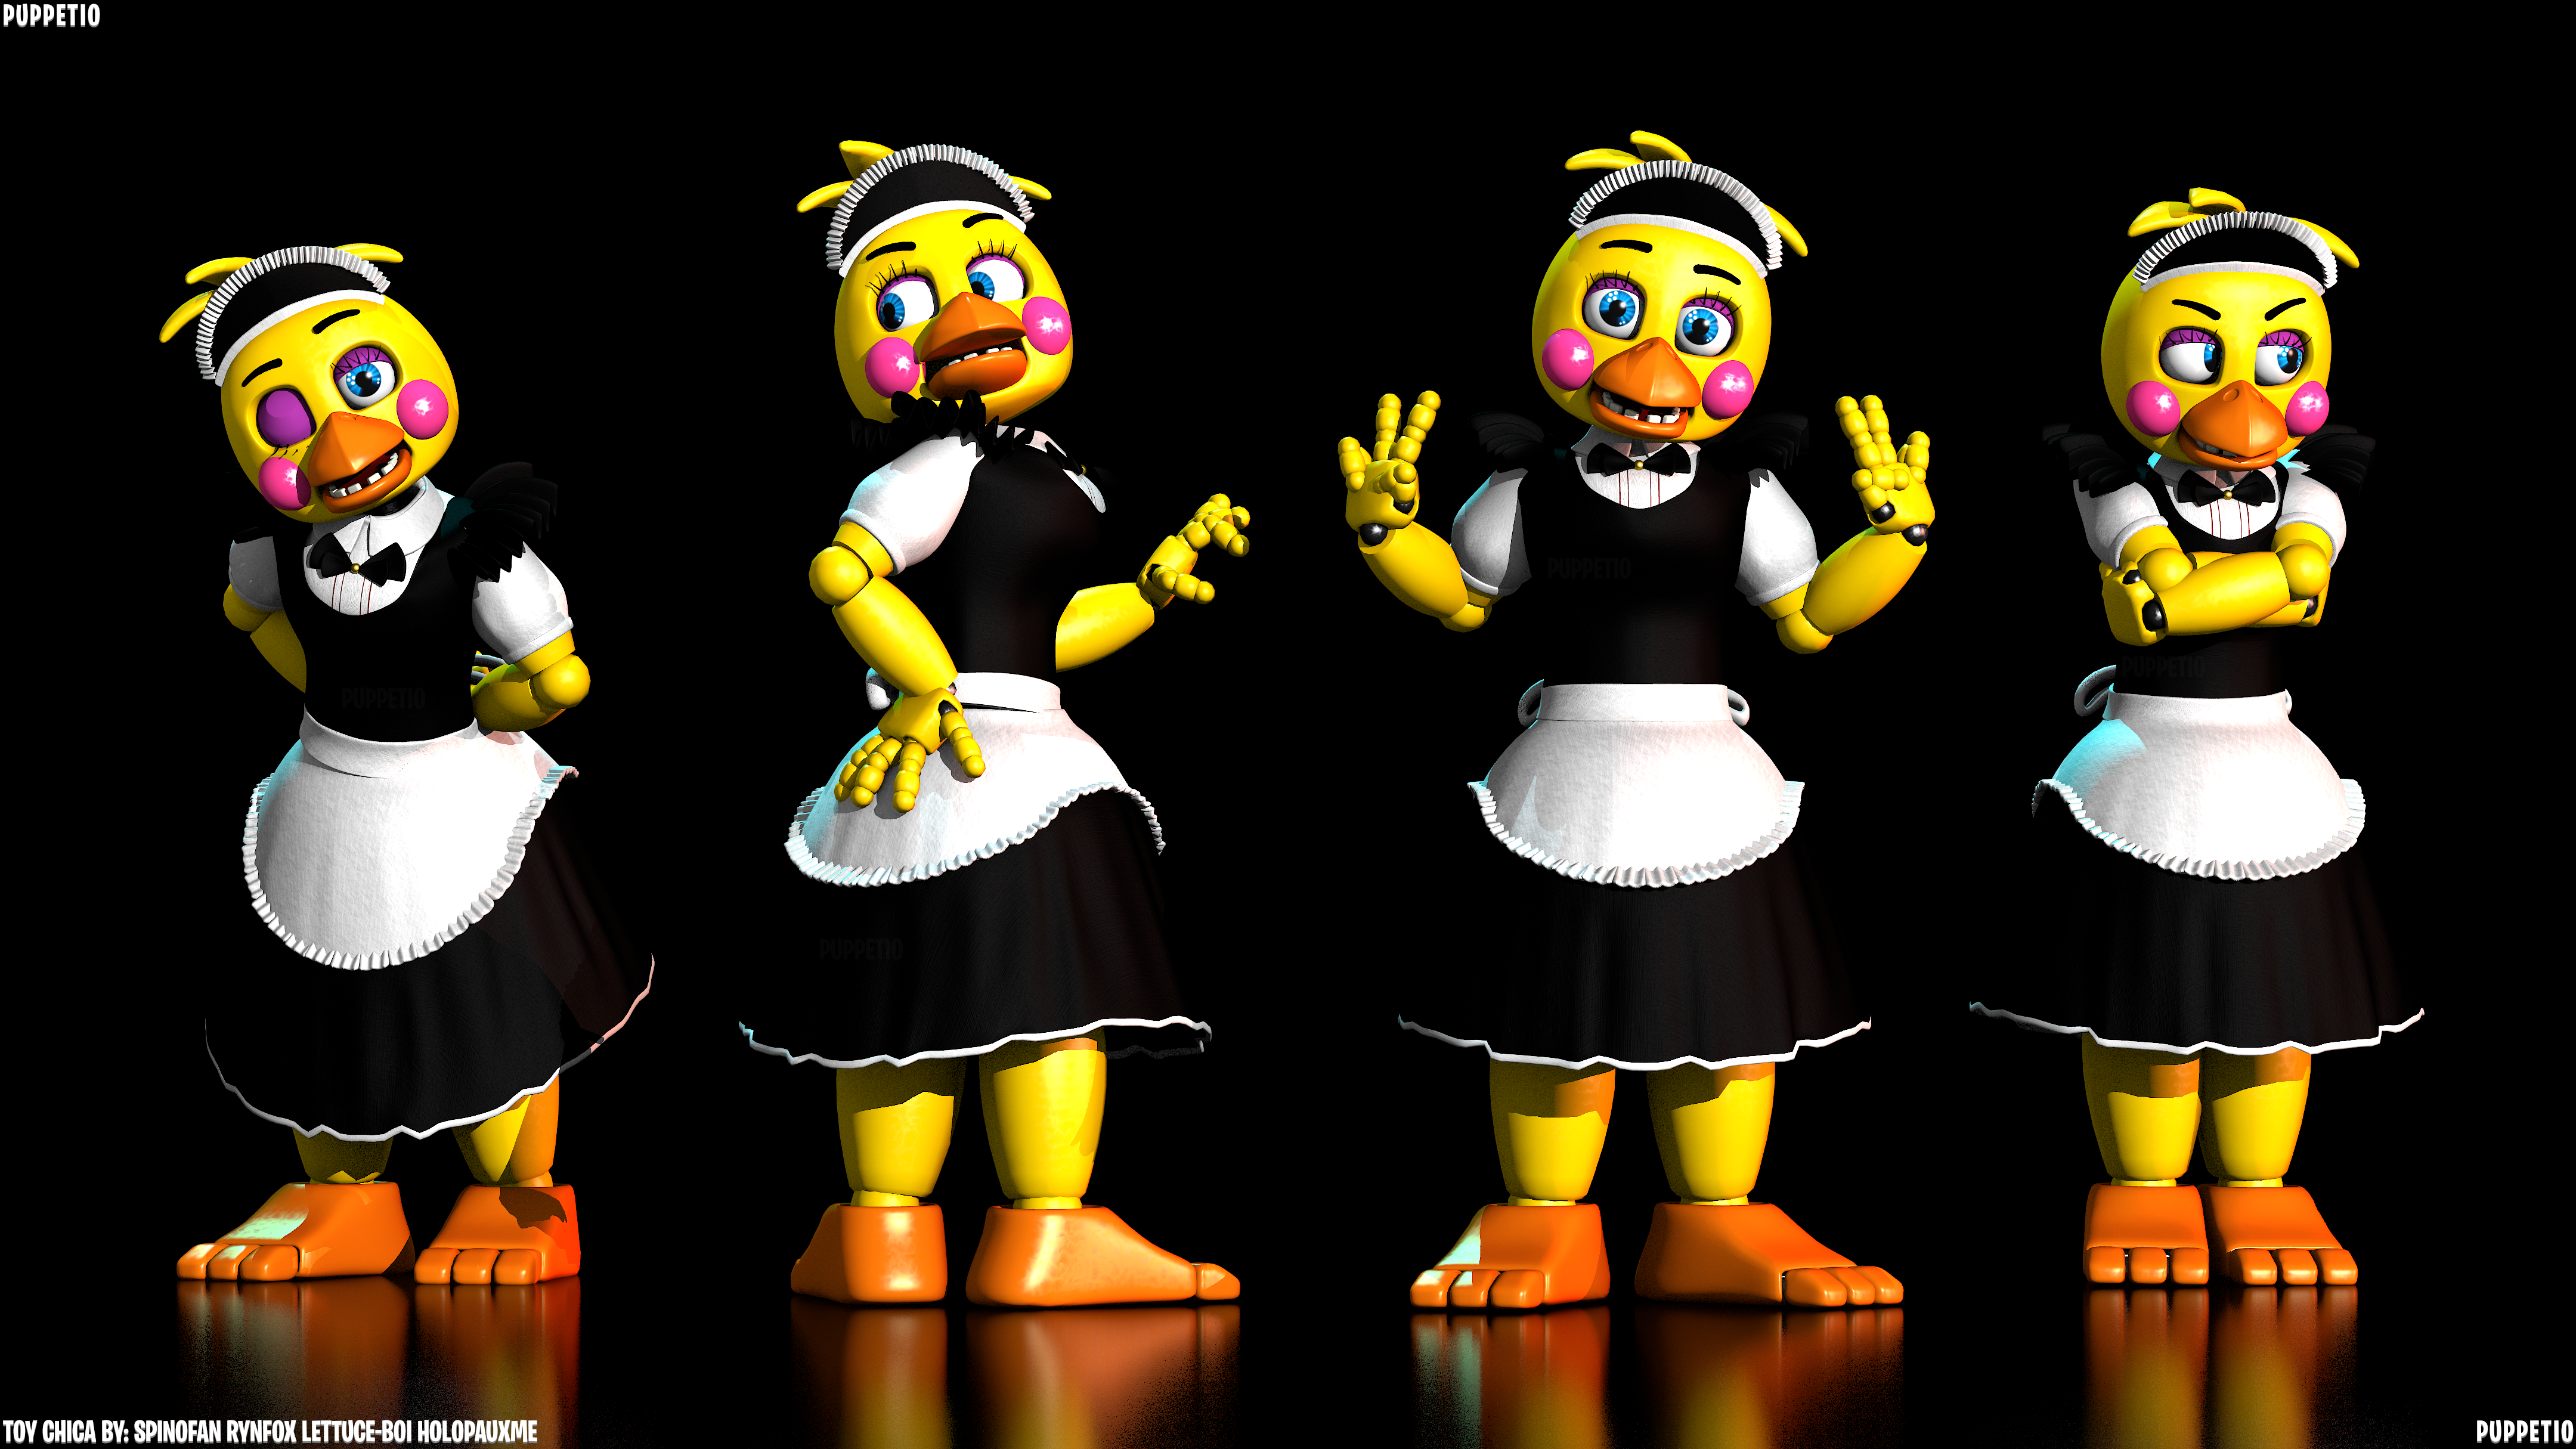 Toy Chica In A Maid Outfit By Puppetio On Deviantart